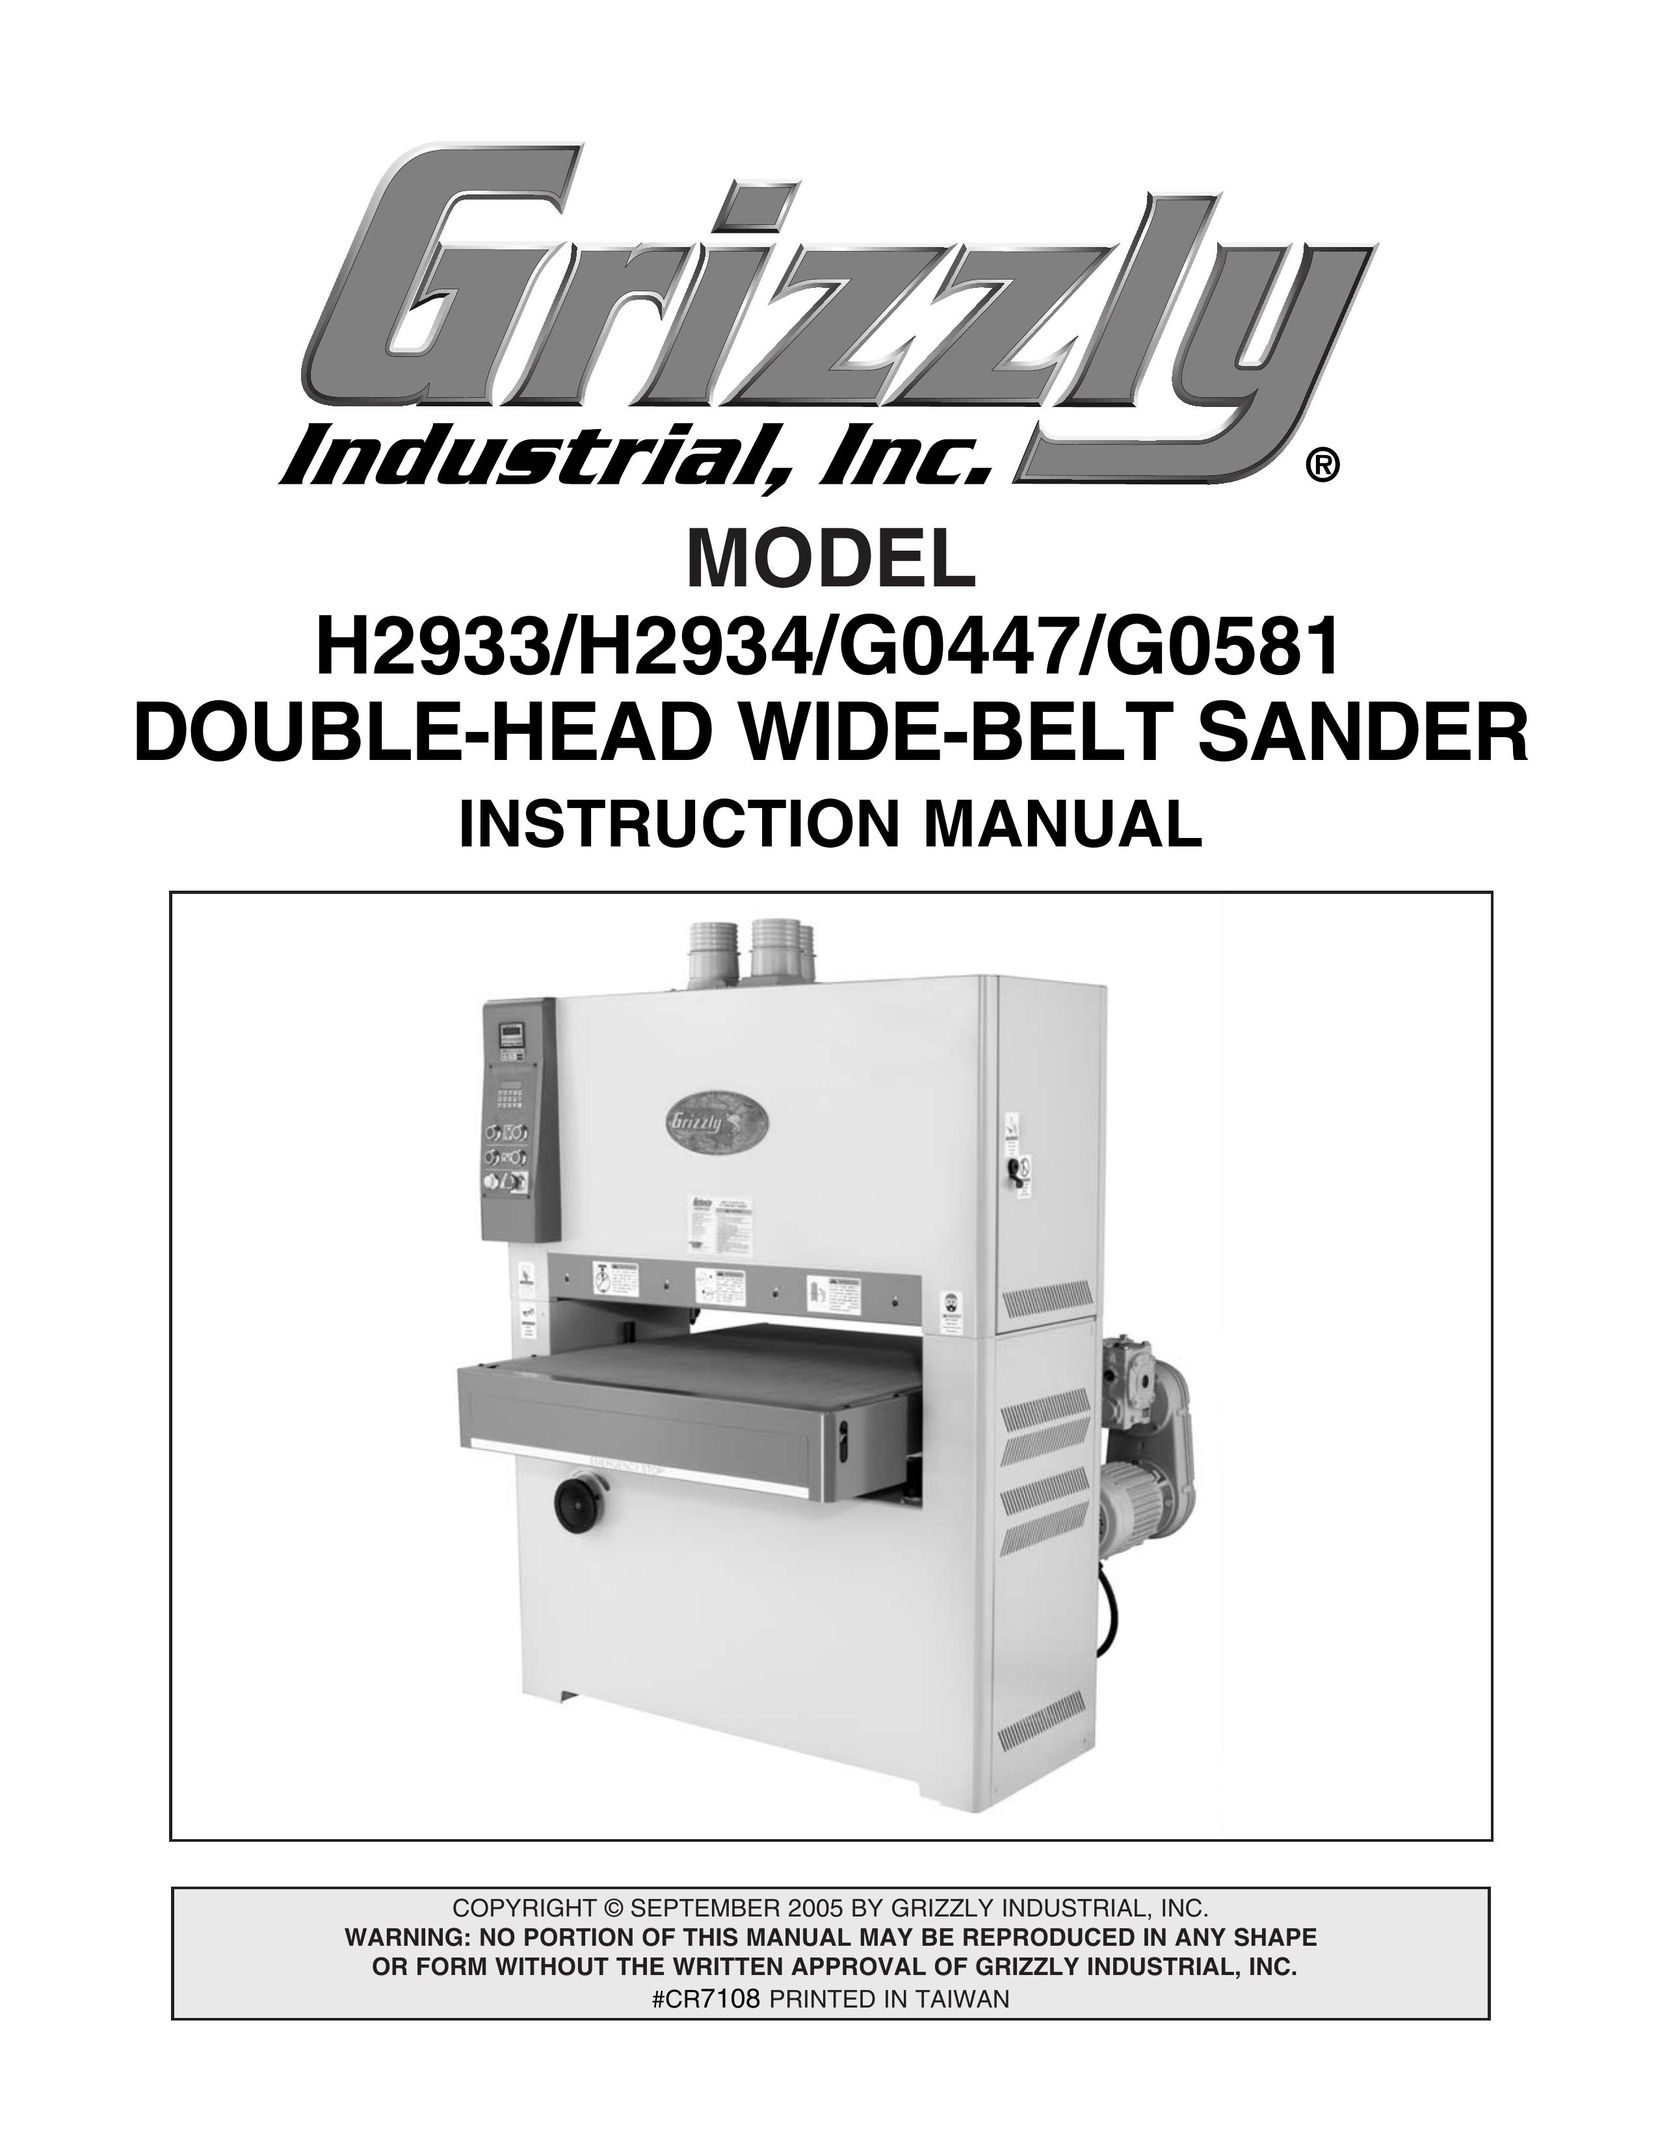 Grizzly G0447 Sander User Manual